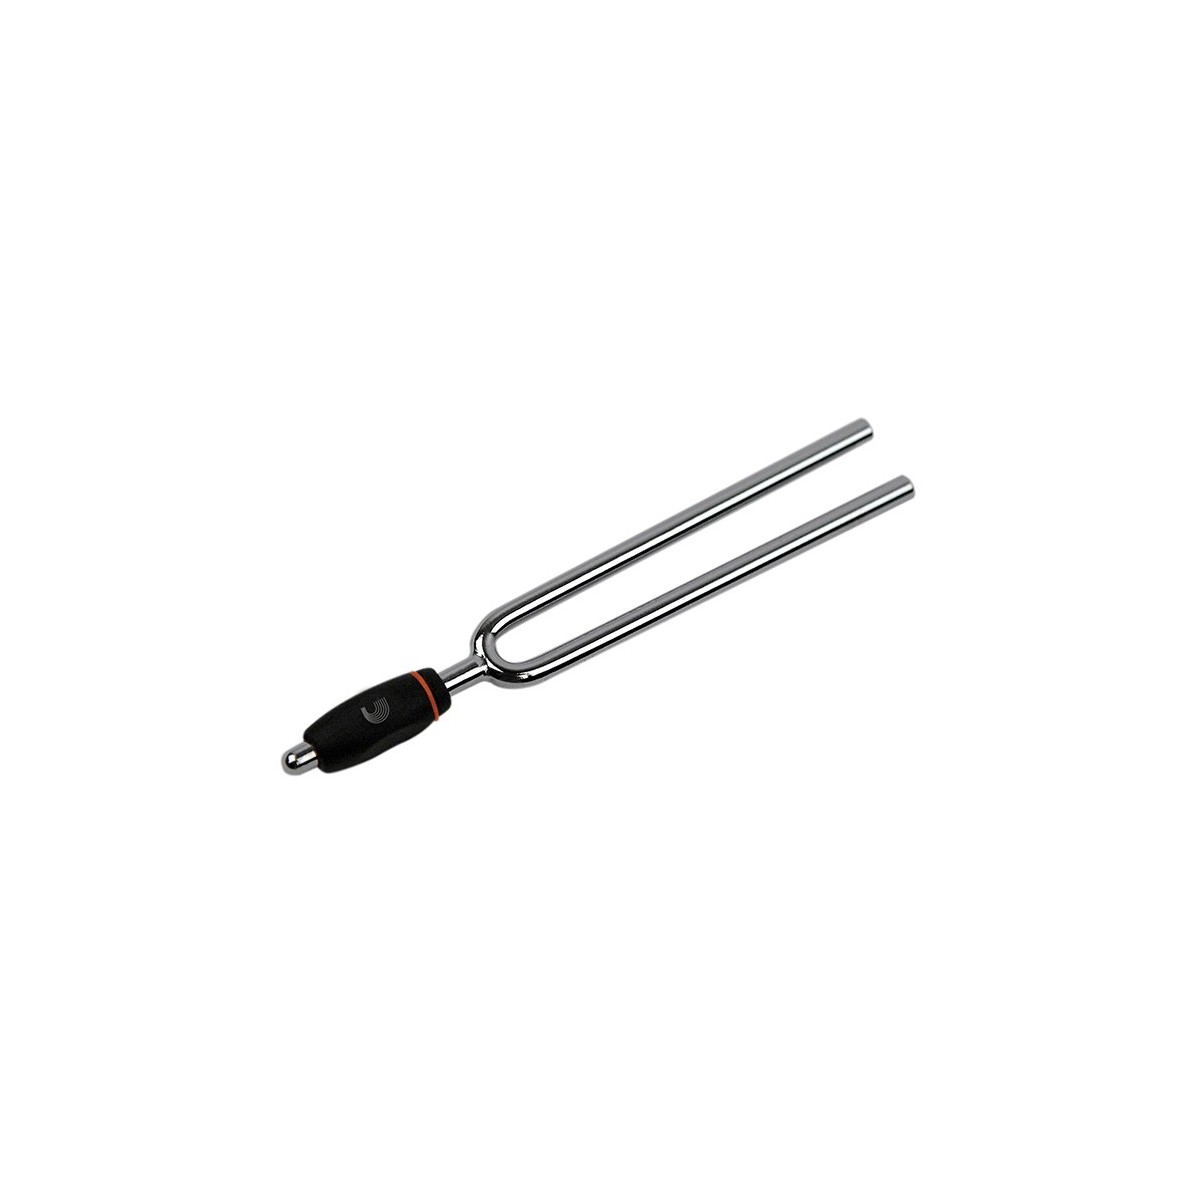 D'ADDARIO PWTF-A TUNING FORK (A-440HZ)